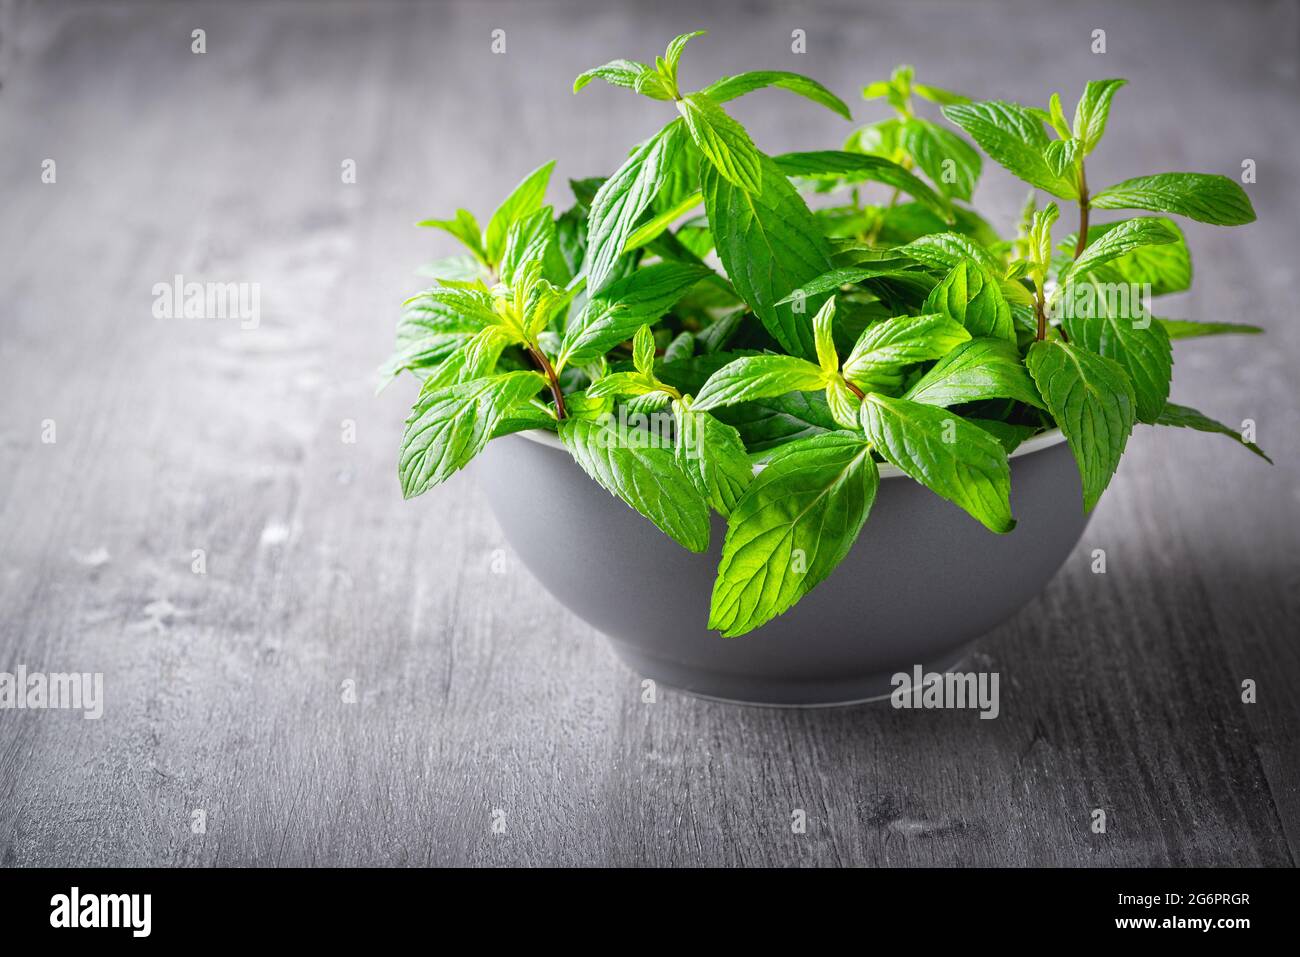 Mint in a plate on a gray wooden table. Stock Photo